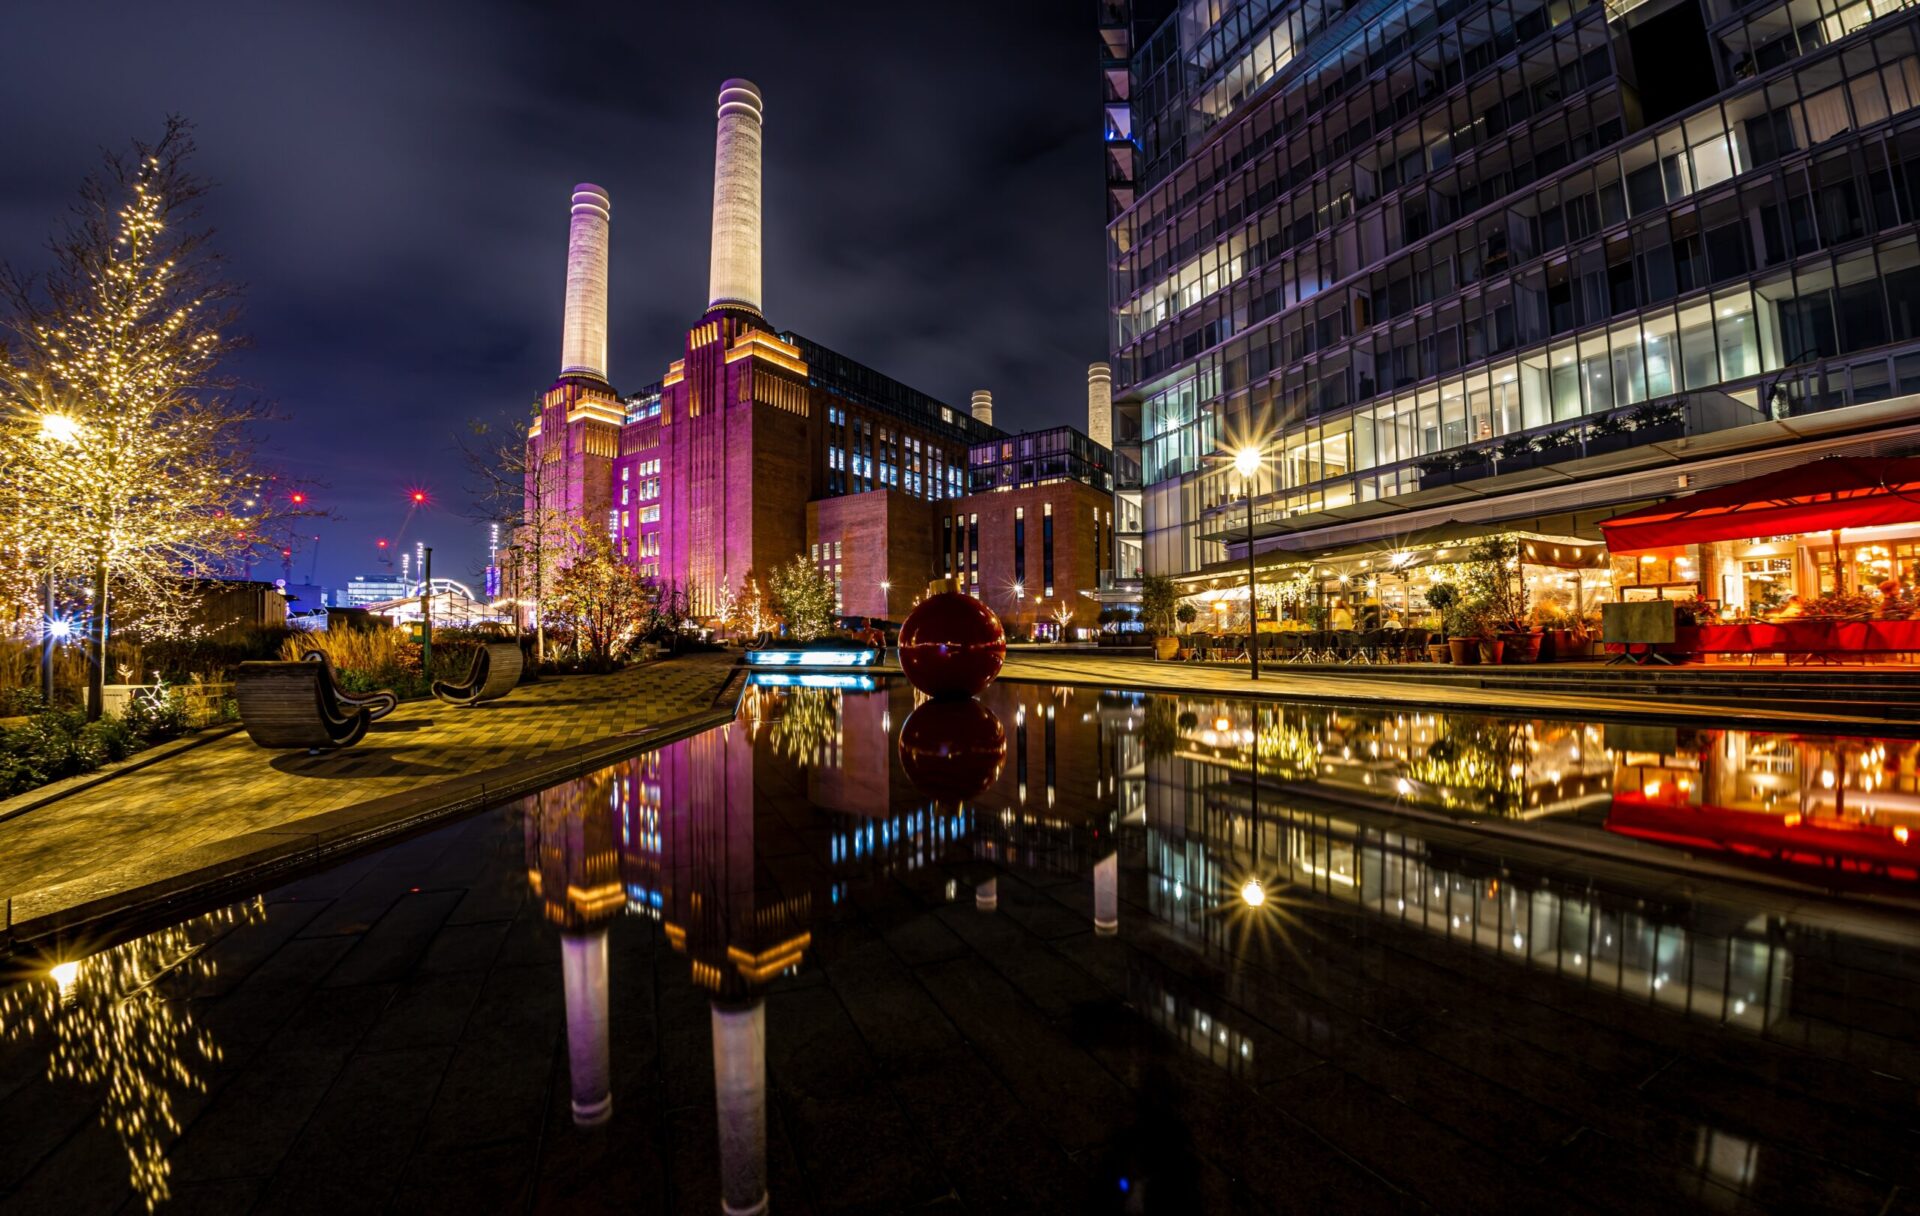 Battersea Power Station at Christmas